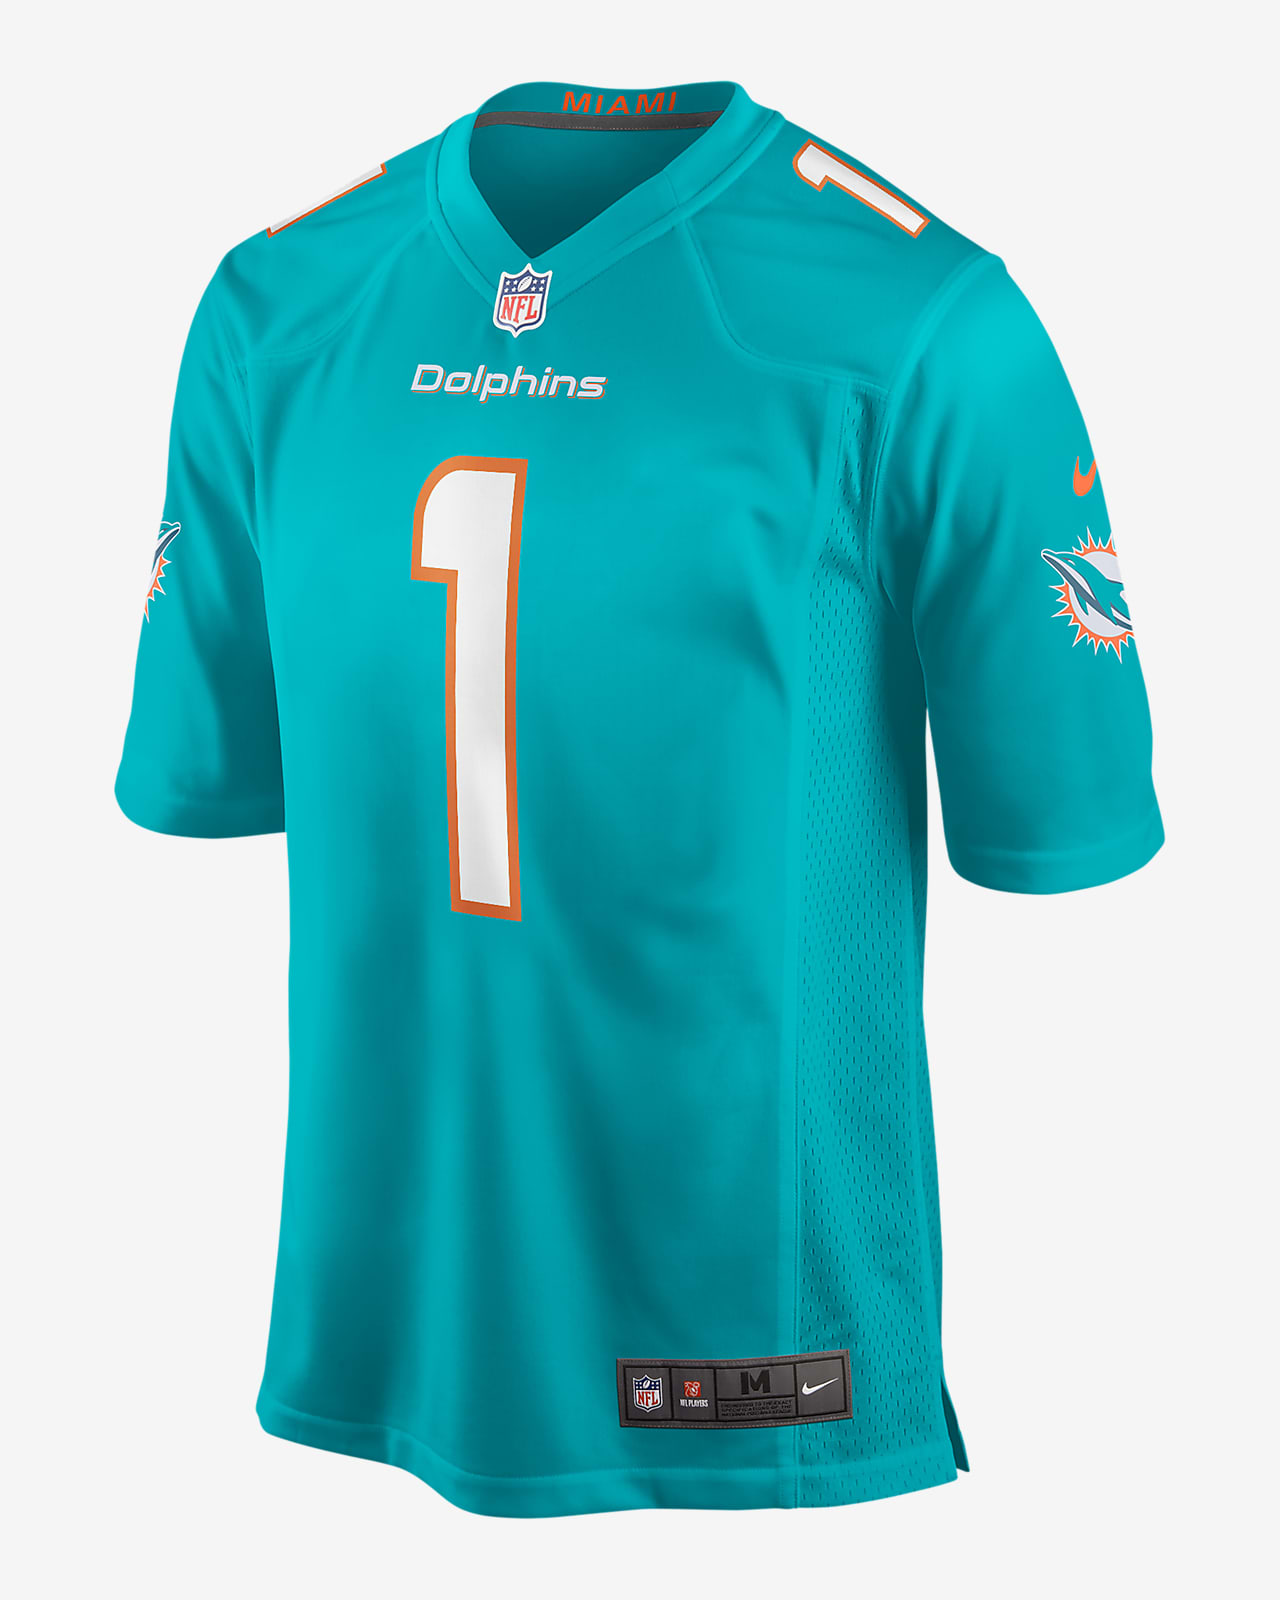 miami dolphins pink shirt